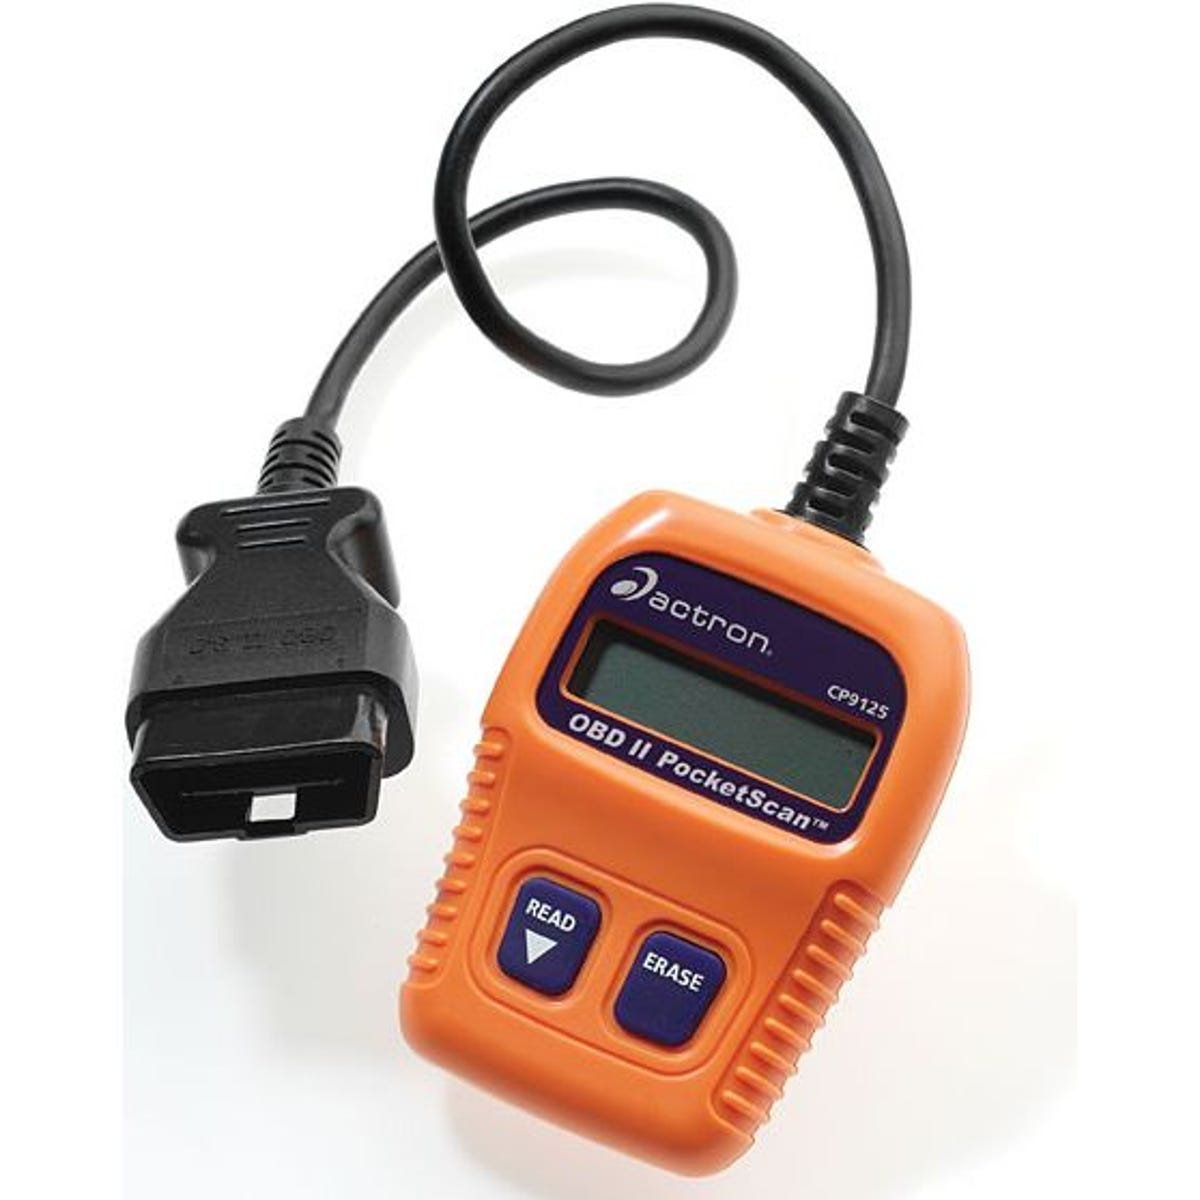 A brief intro to OBD-II technology - CNET